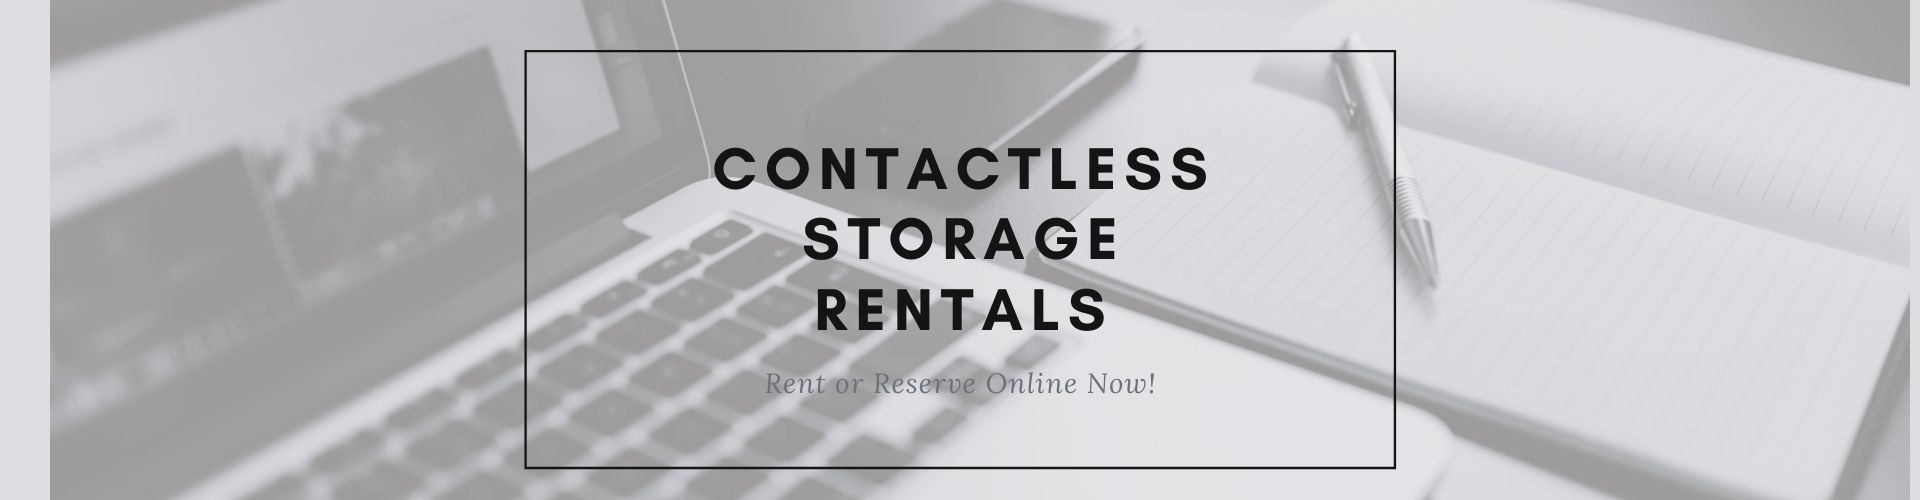 contactless storage rentals in MA